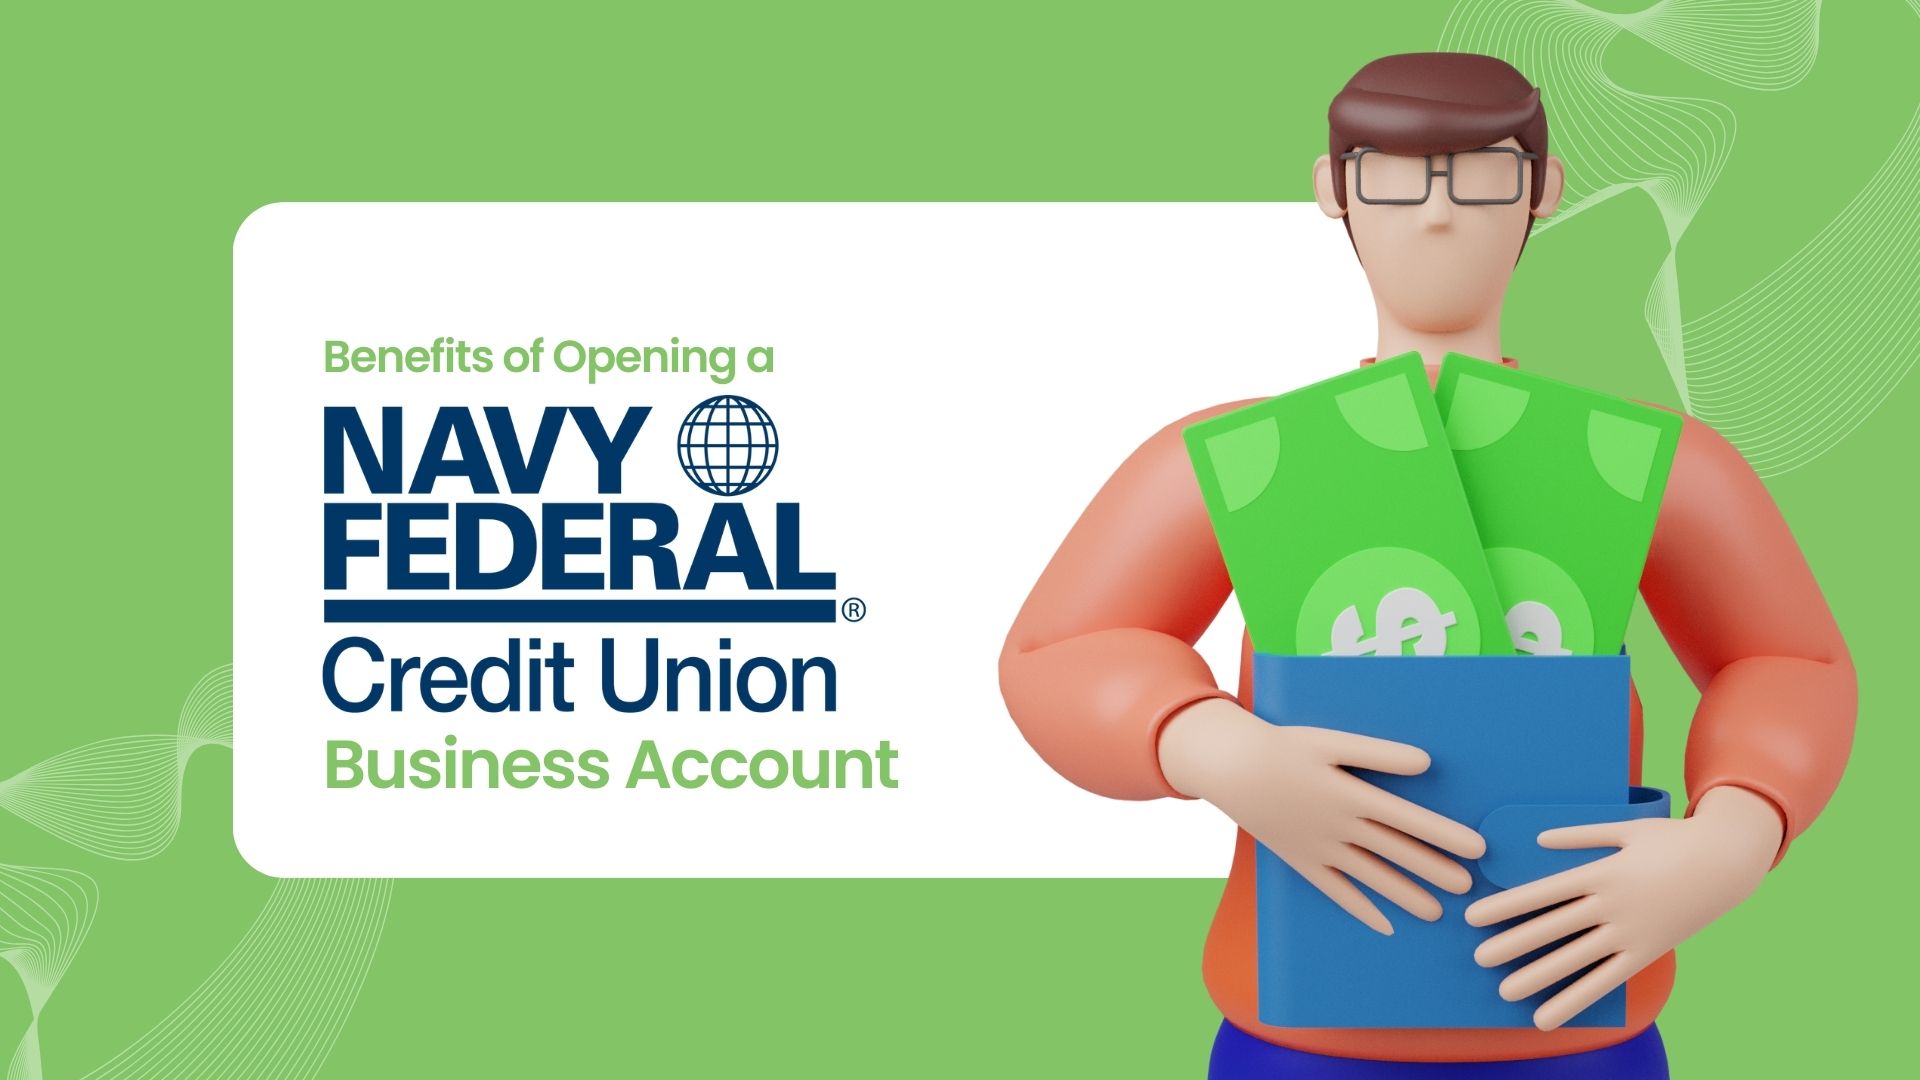 Benefits of Opening a Navy Federal Credit Union Business Account